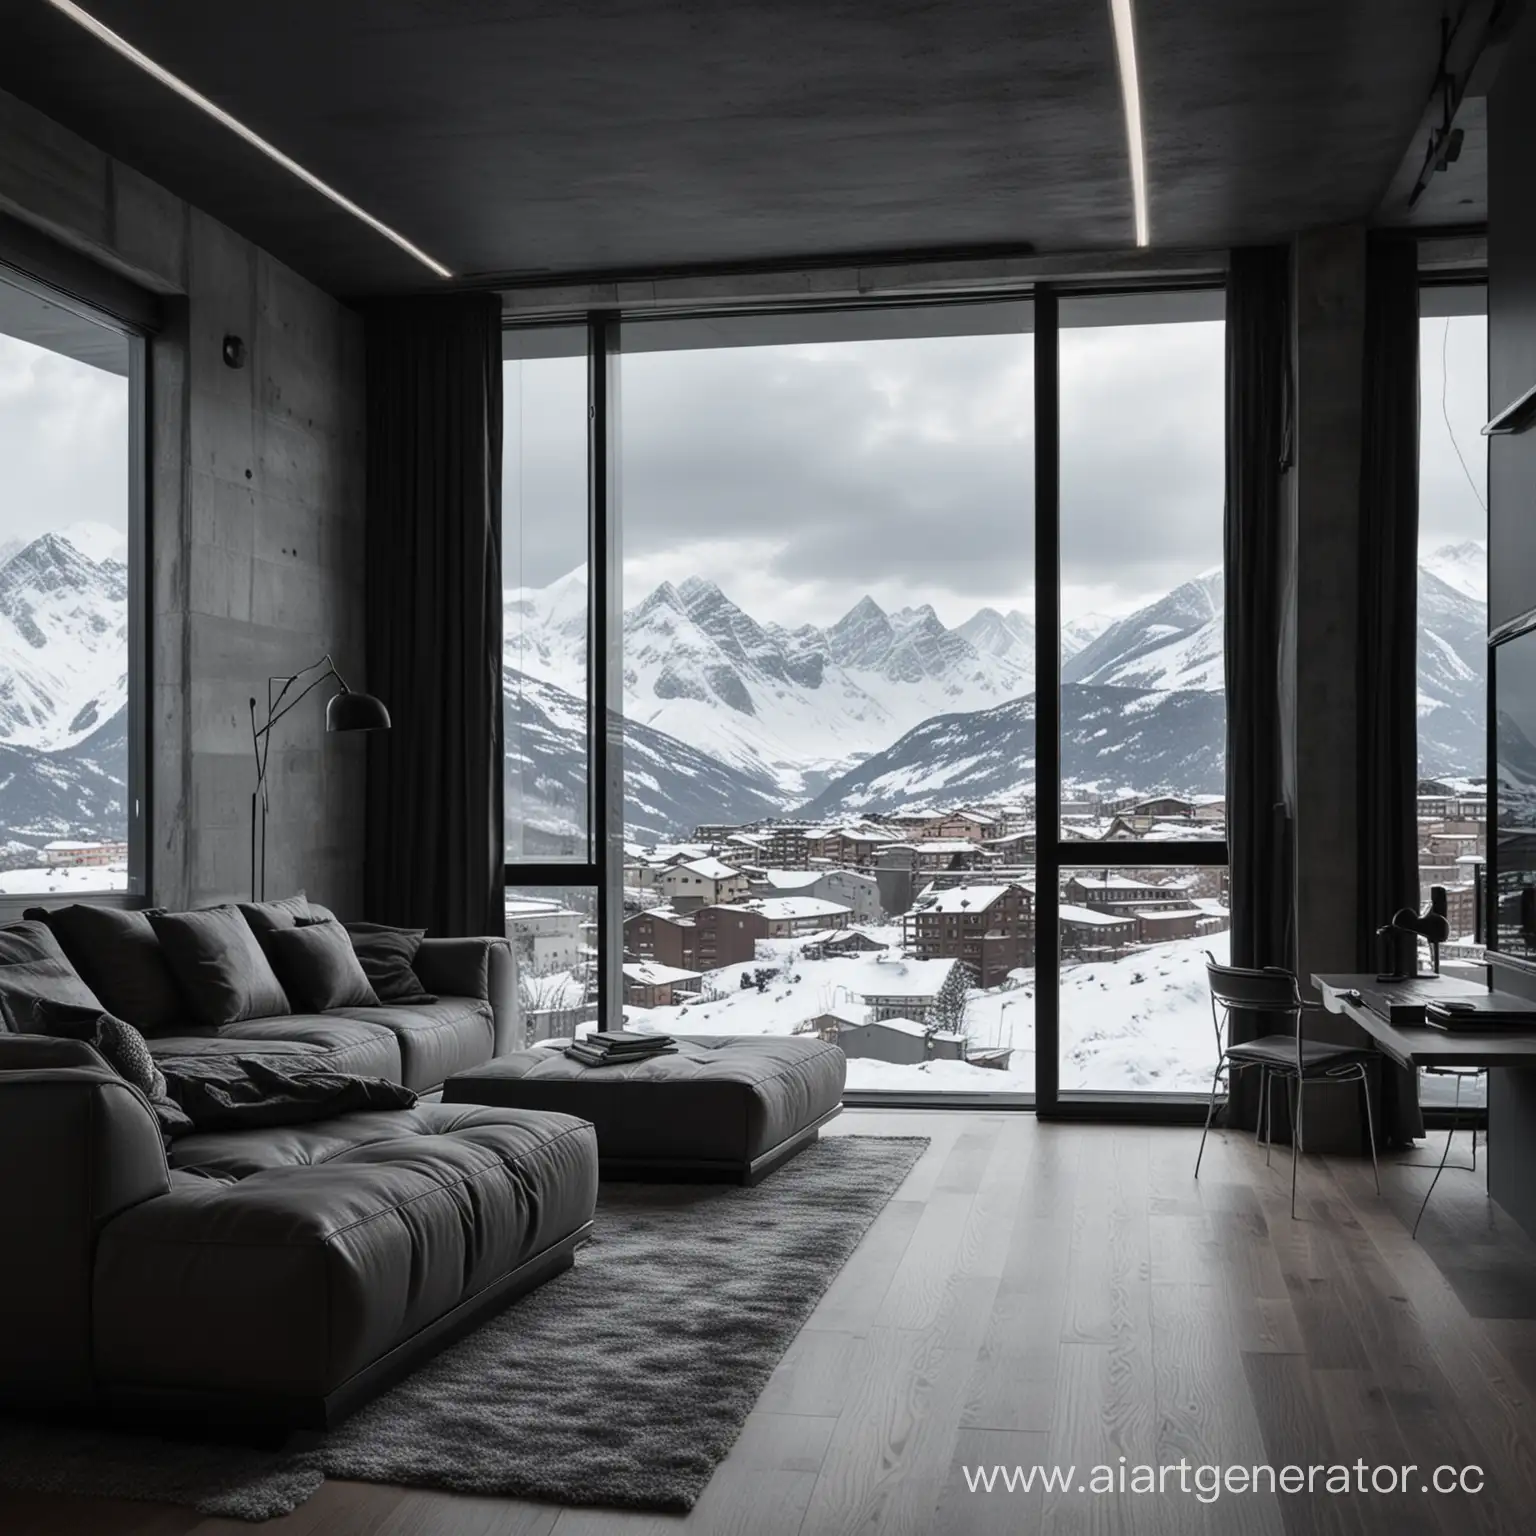 Futuristic-Apartment-Overlooking-Snowy-Mountains-Modern-DarkToned-Living-Space